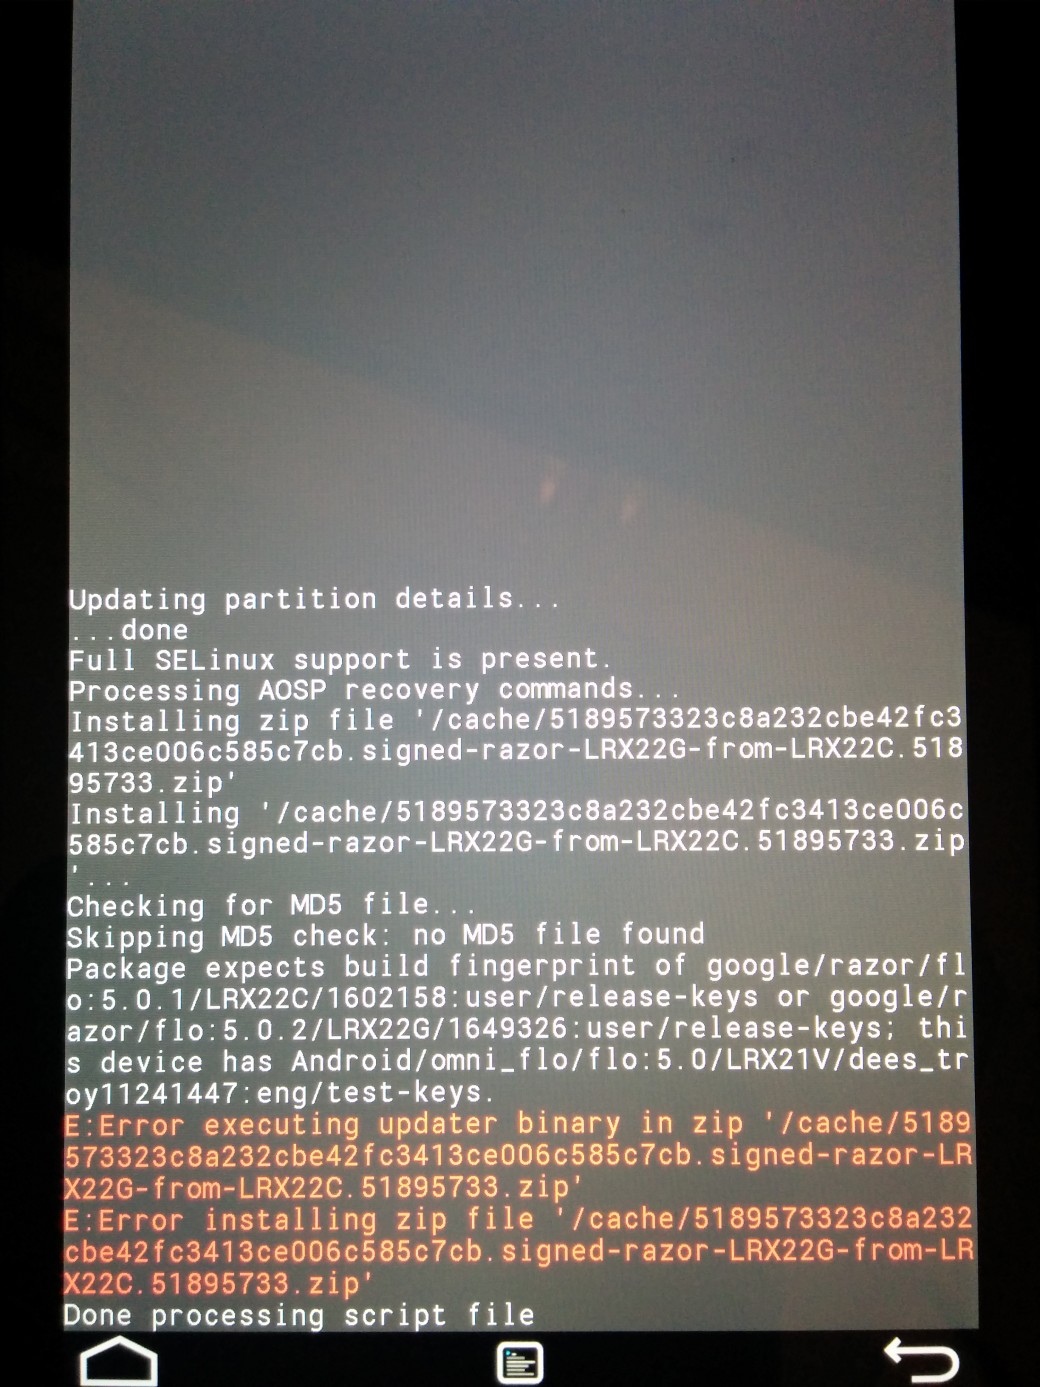 This is what response will be like when you try to make update 5.0.2 at Nexus 7 from custom recovery